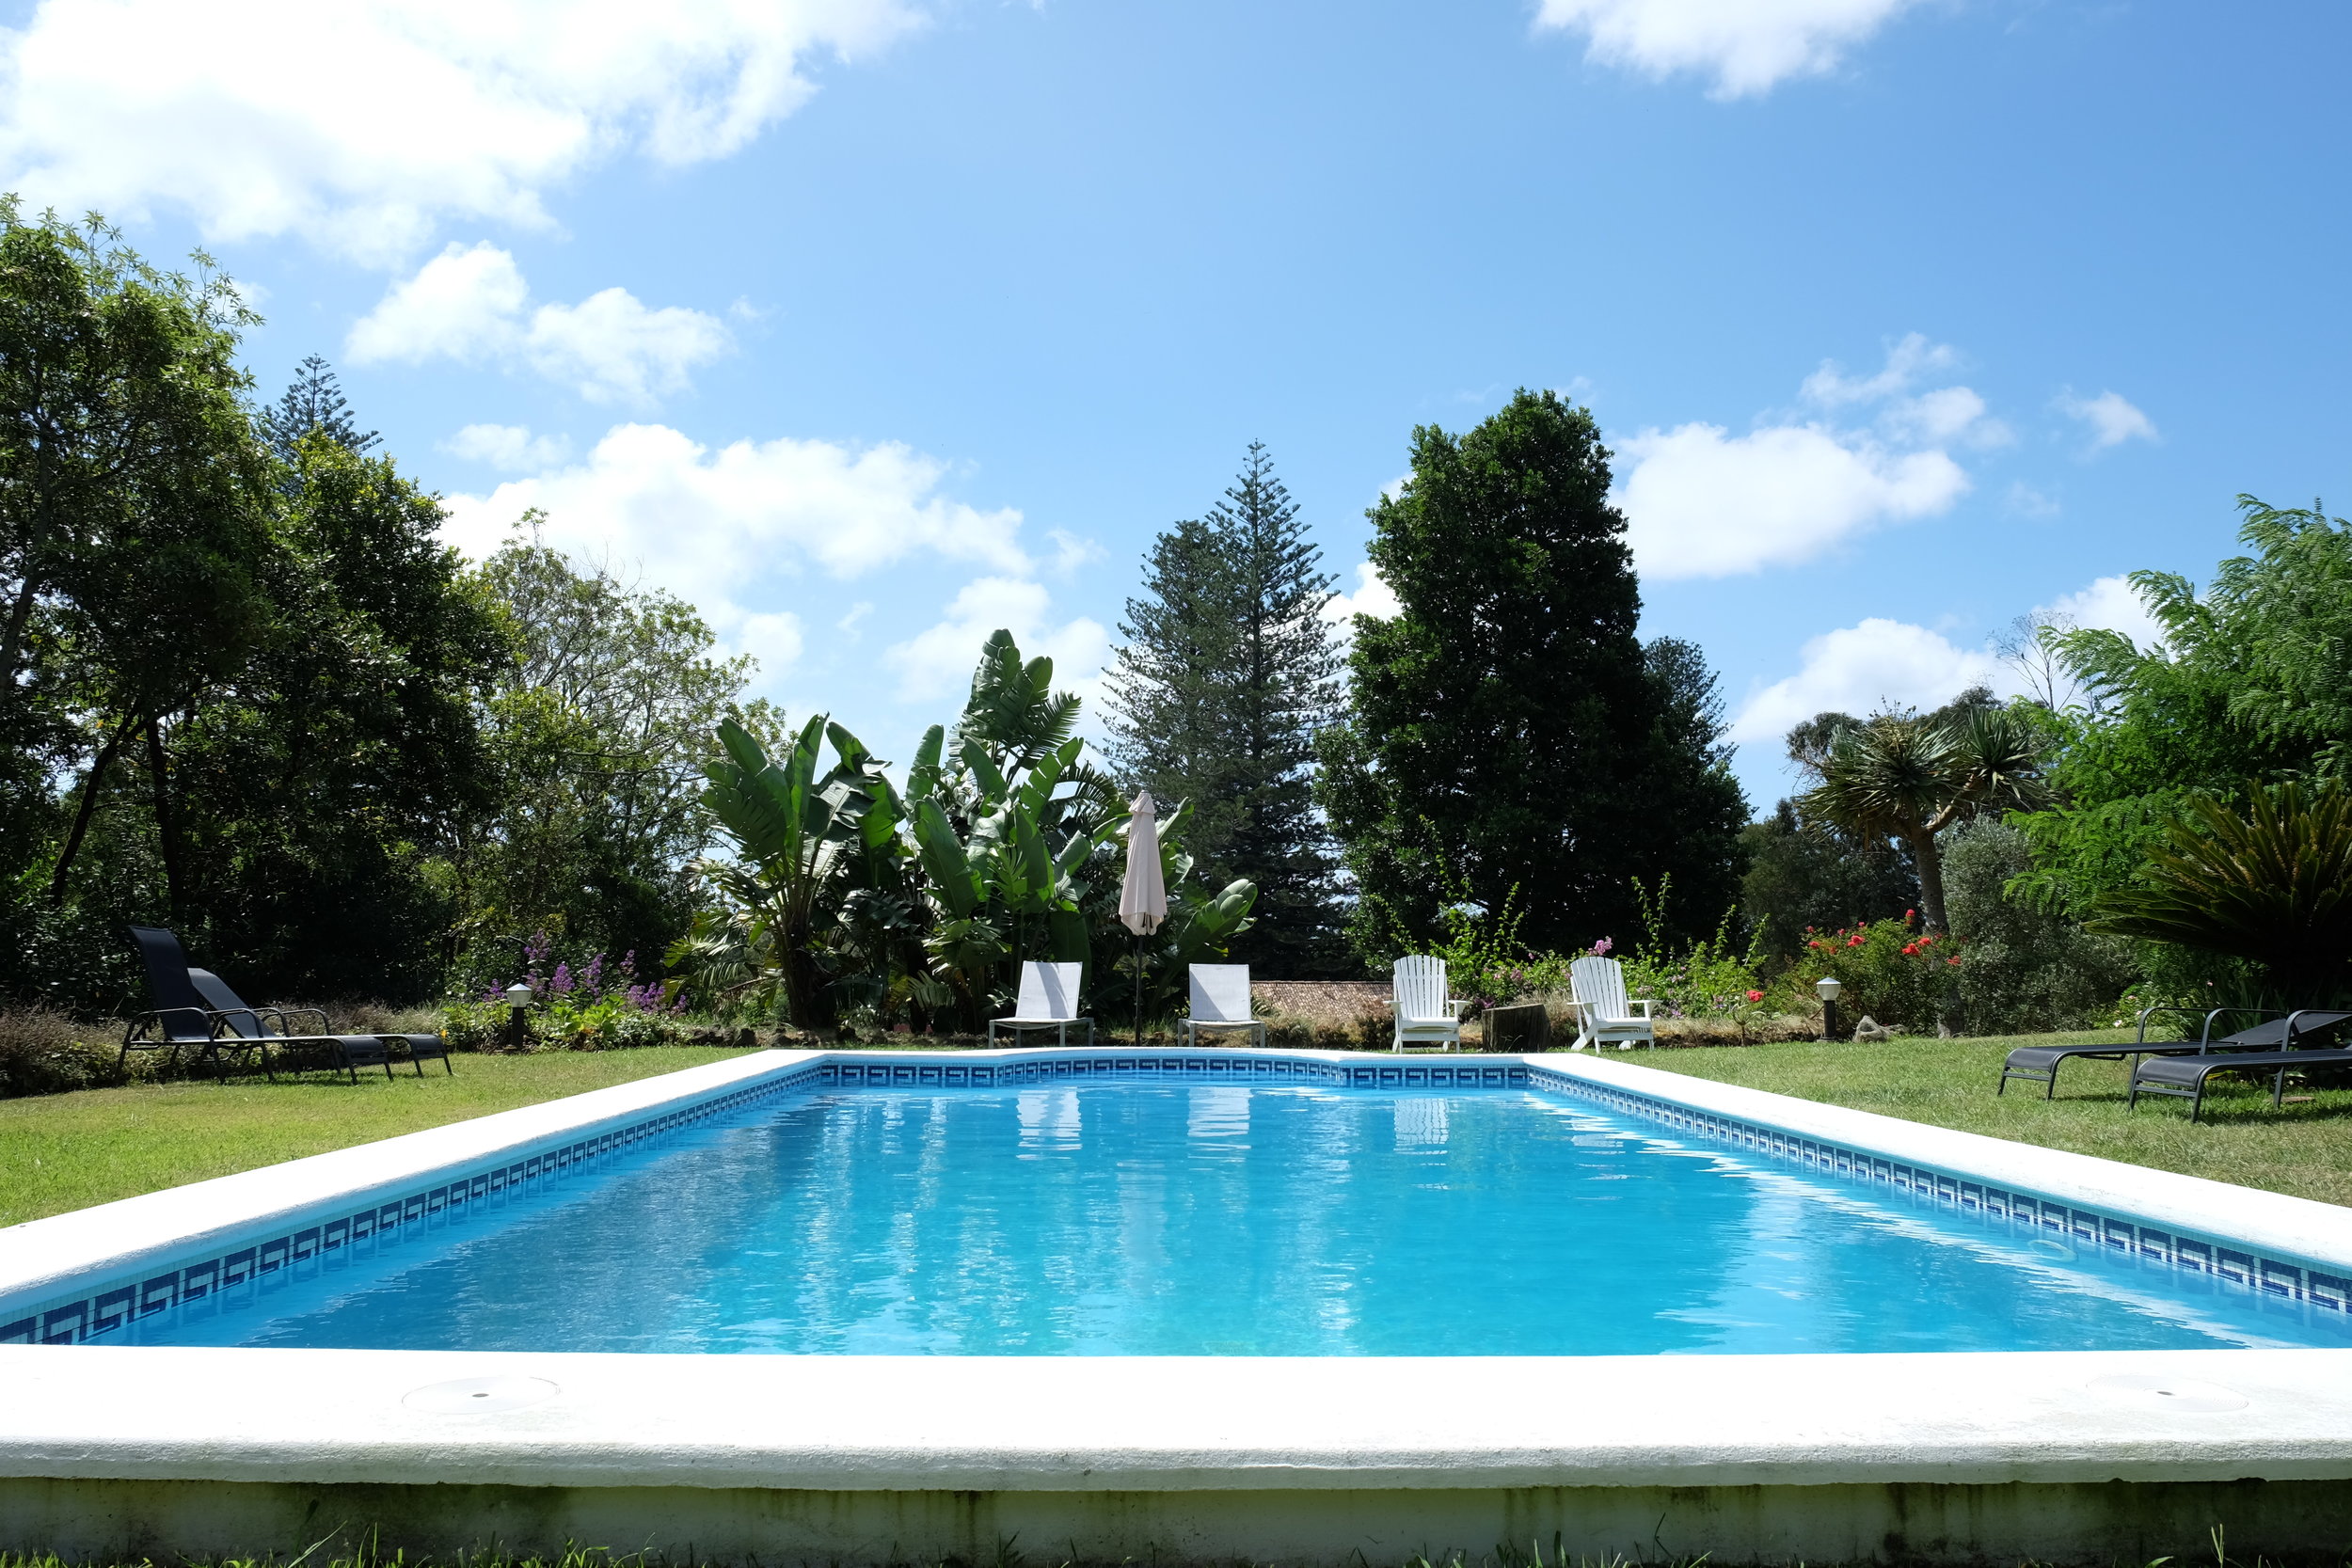 Azores Hotels | Pink House Sao Miguel Azores